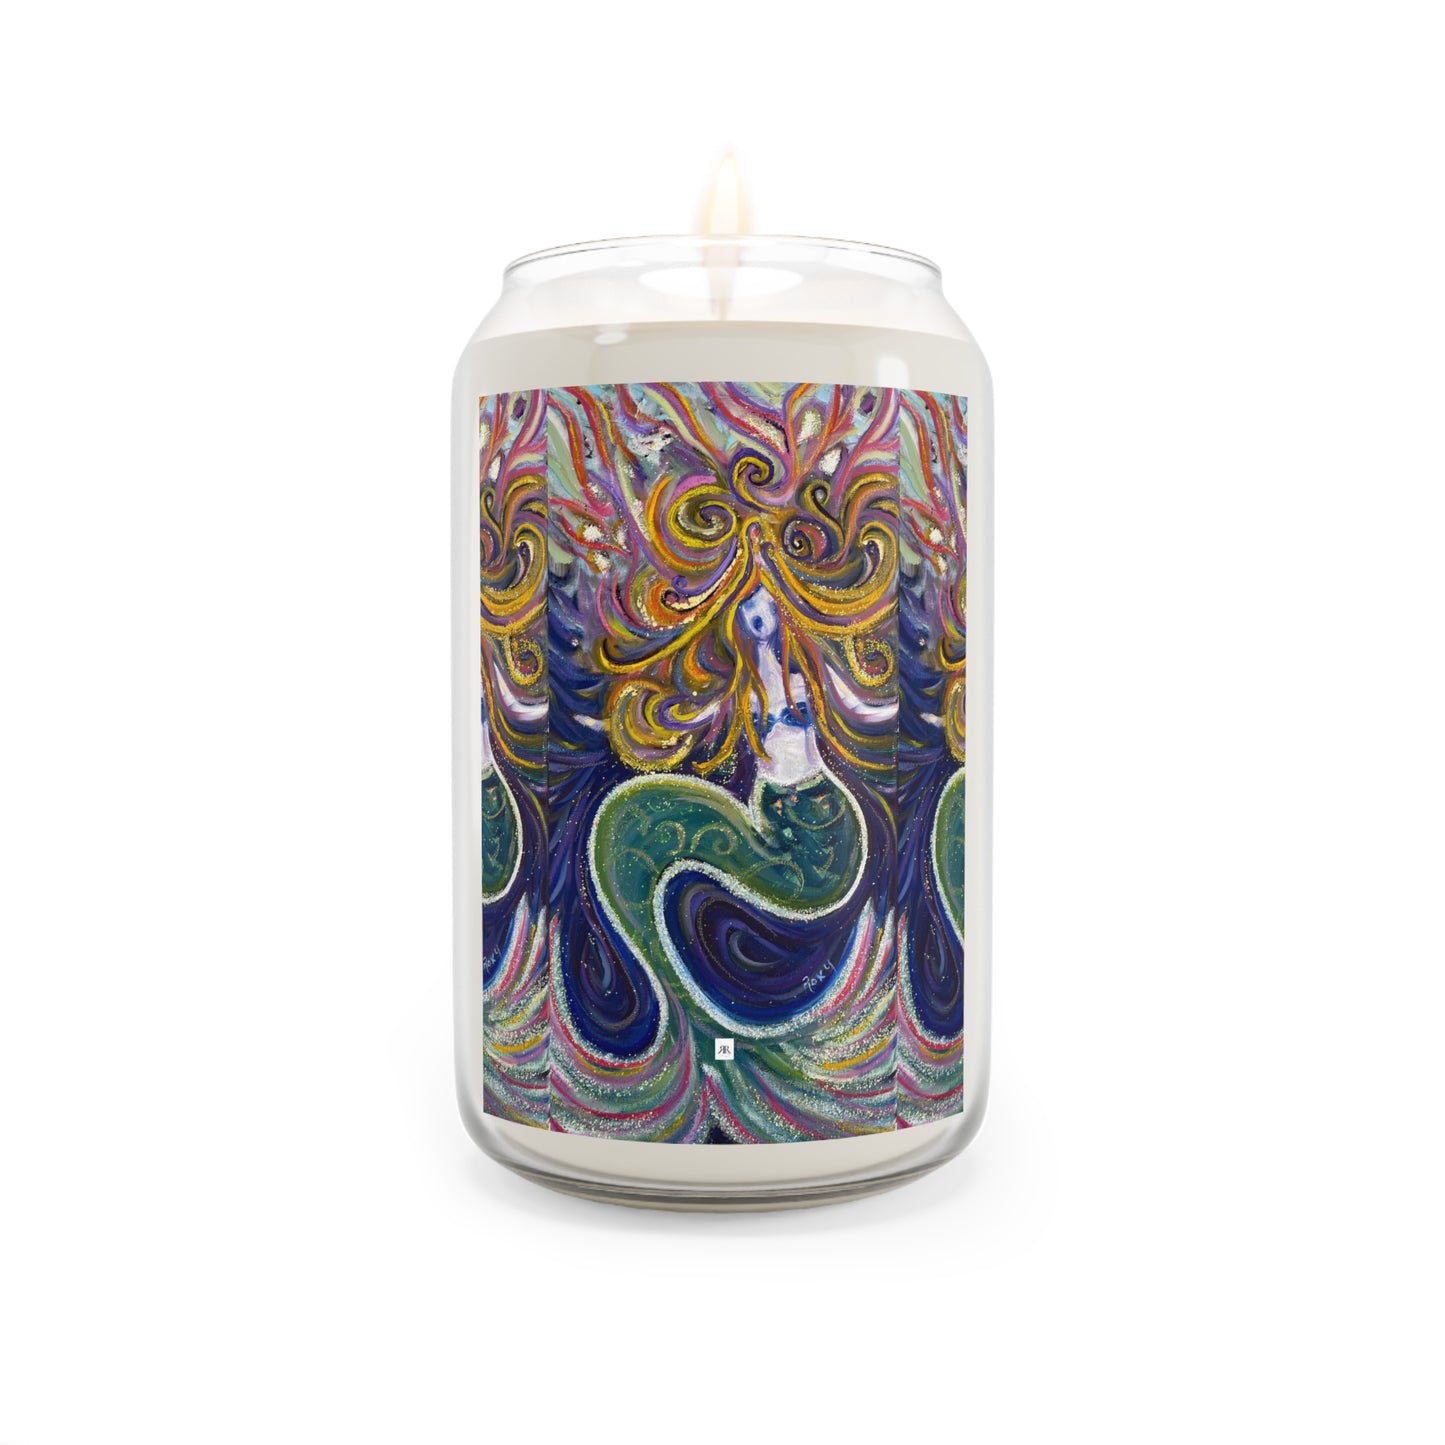 Screaming Siren (Mermaid) Scented Candle, 13.75oz